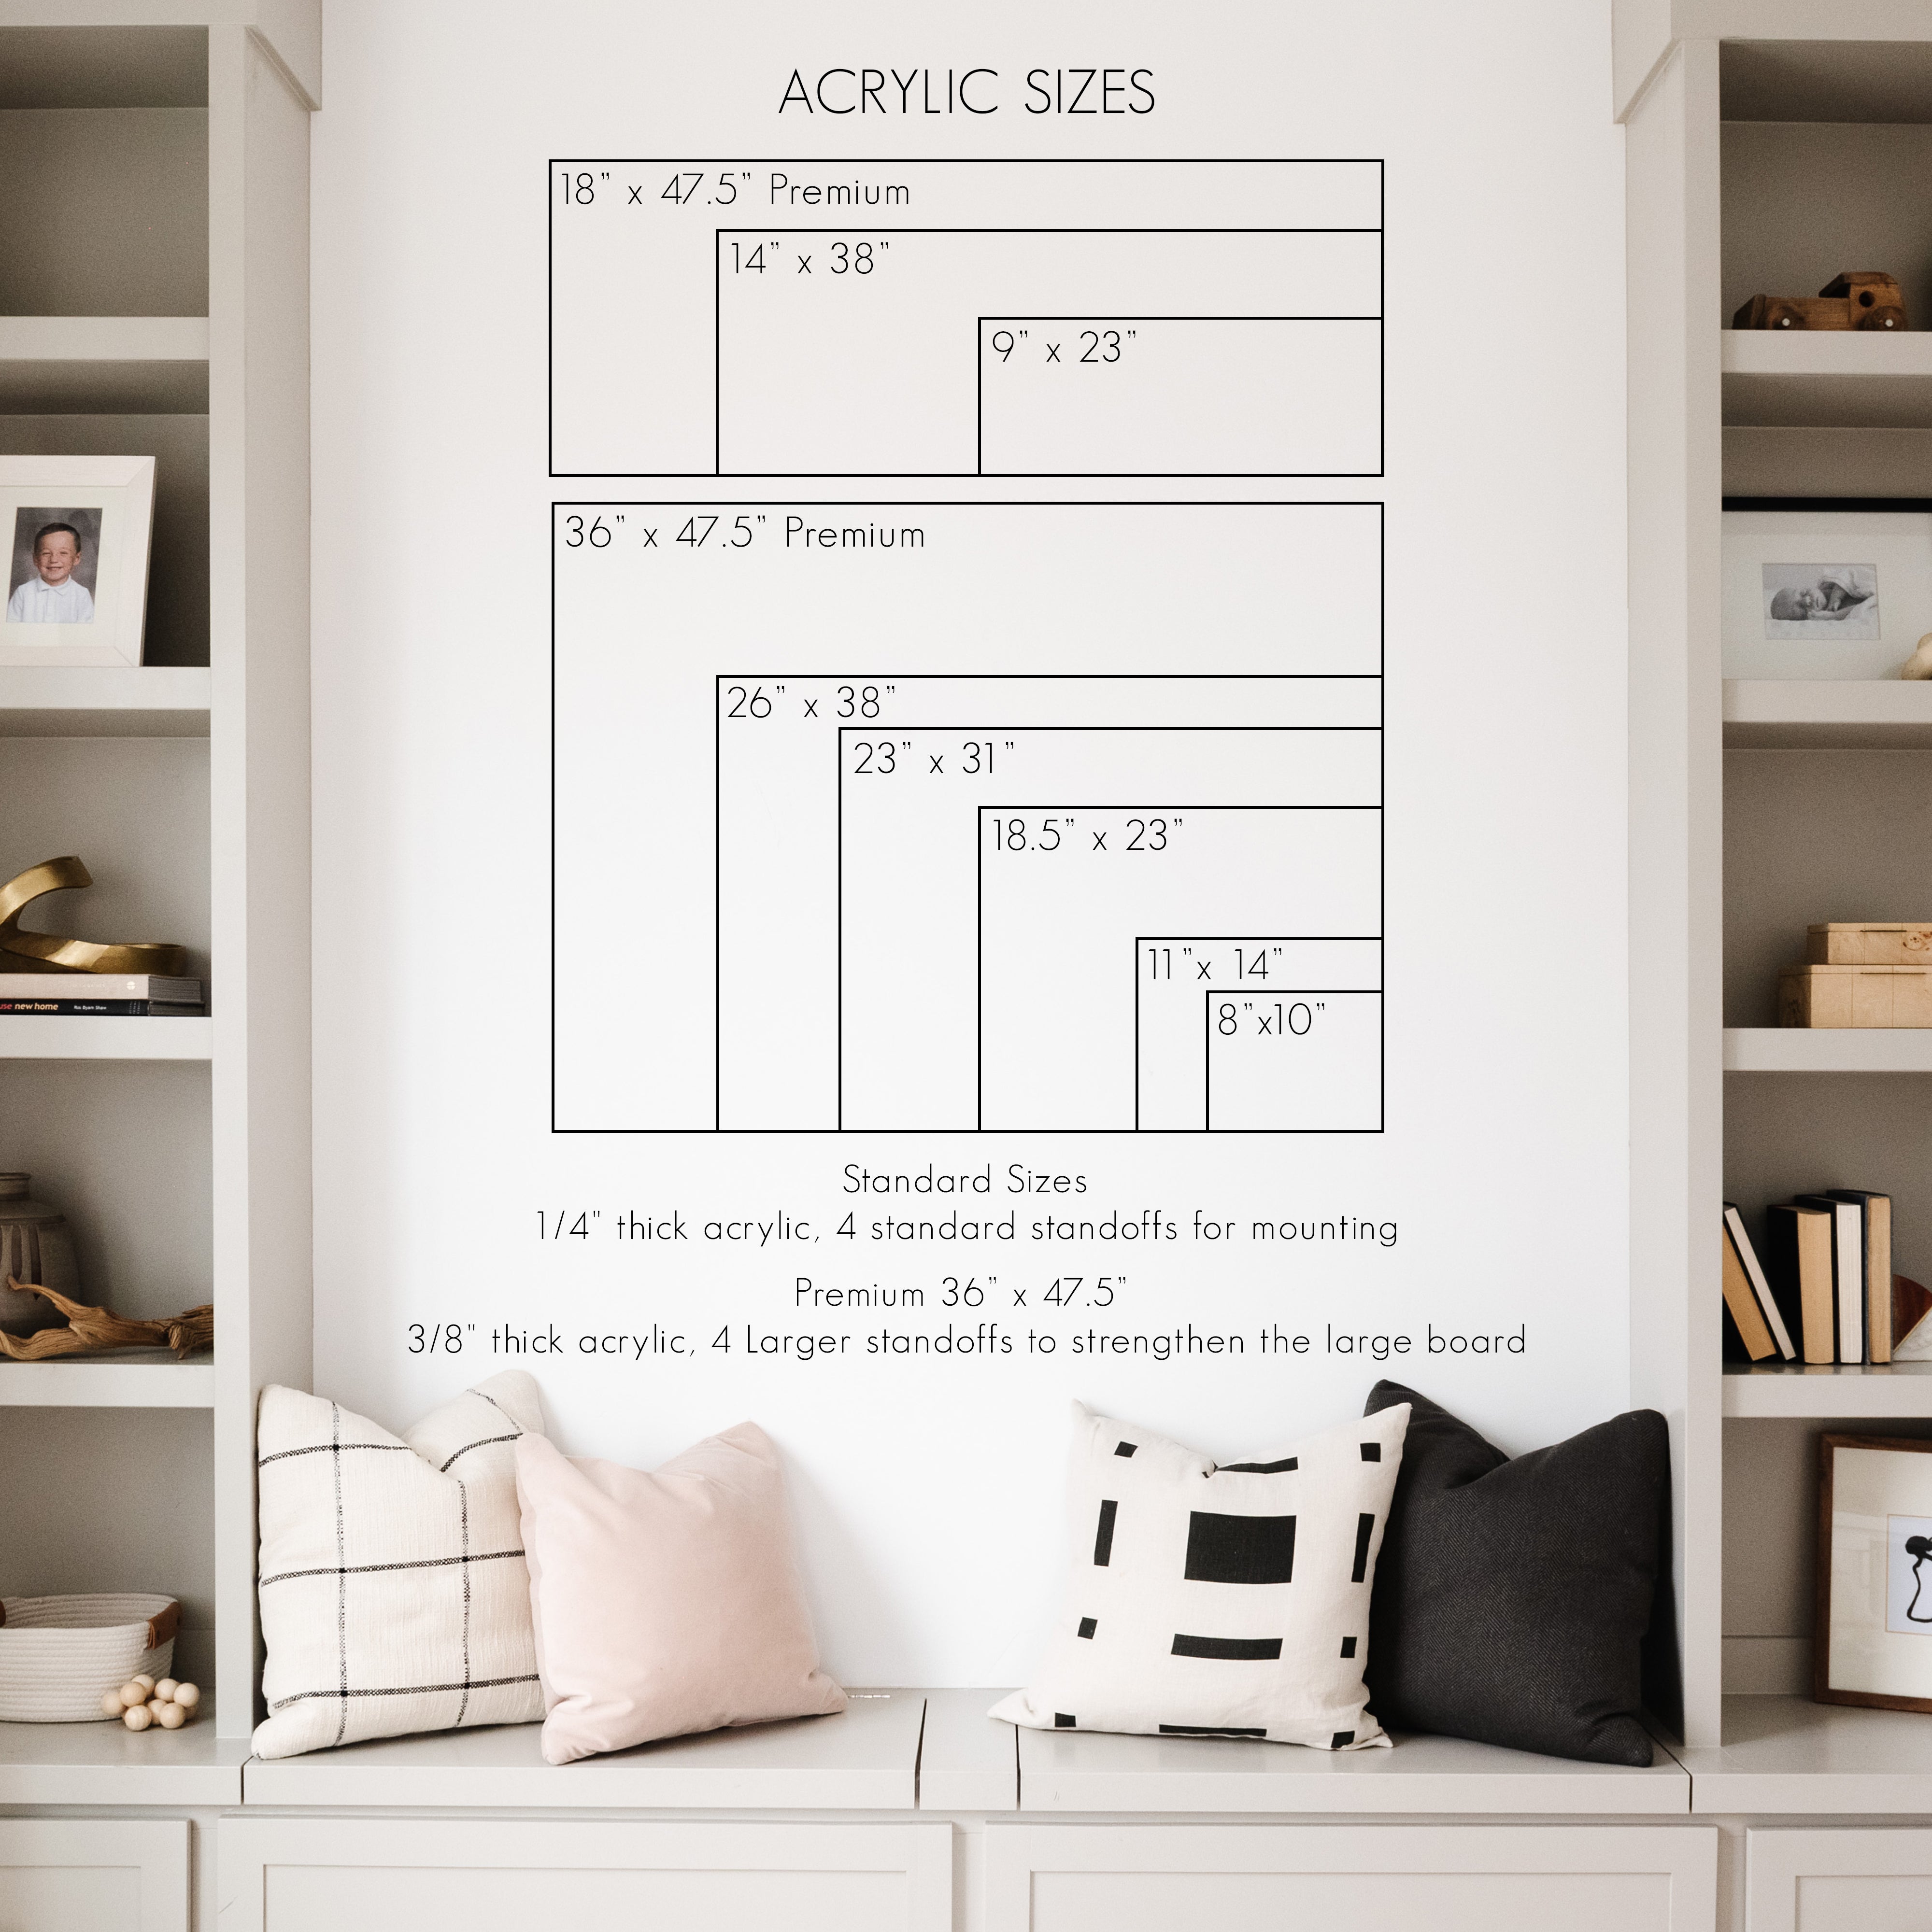 Week & Month Frosted Acrylic Calendar + 2 Sections | Horizontal Pennington